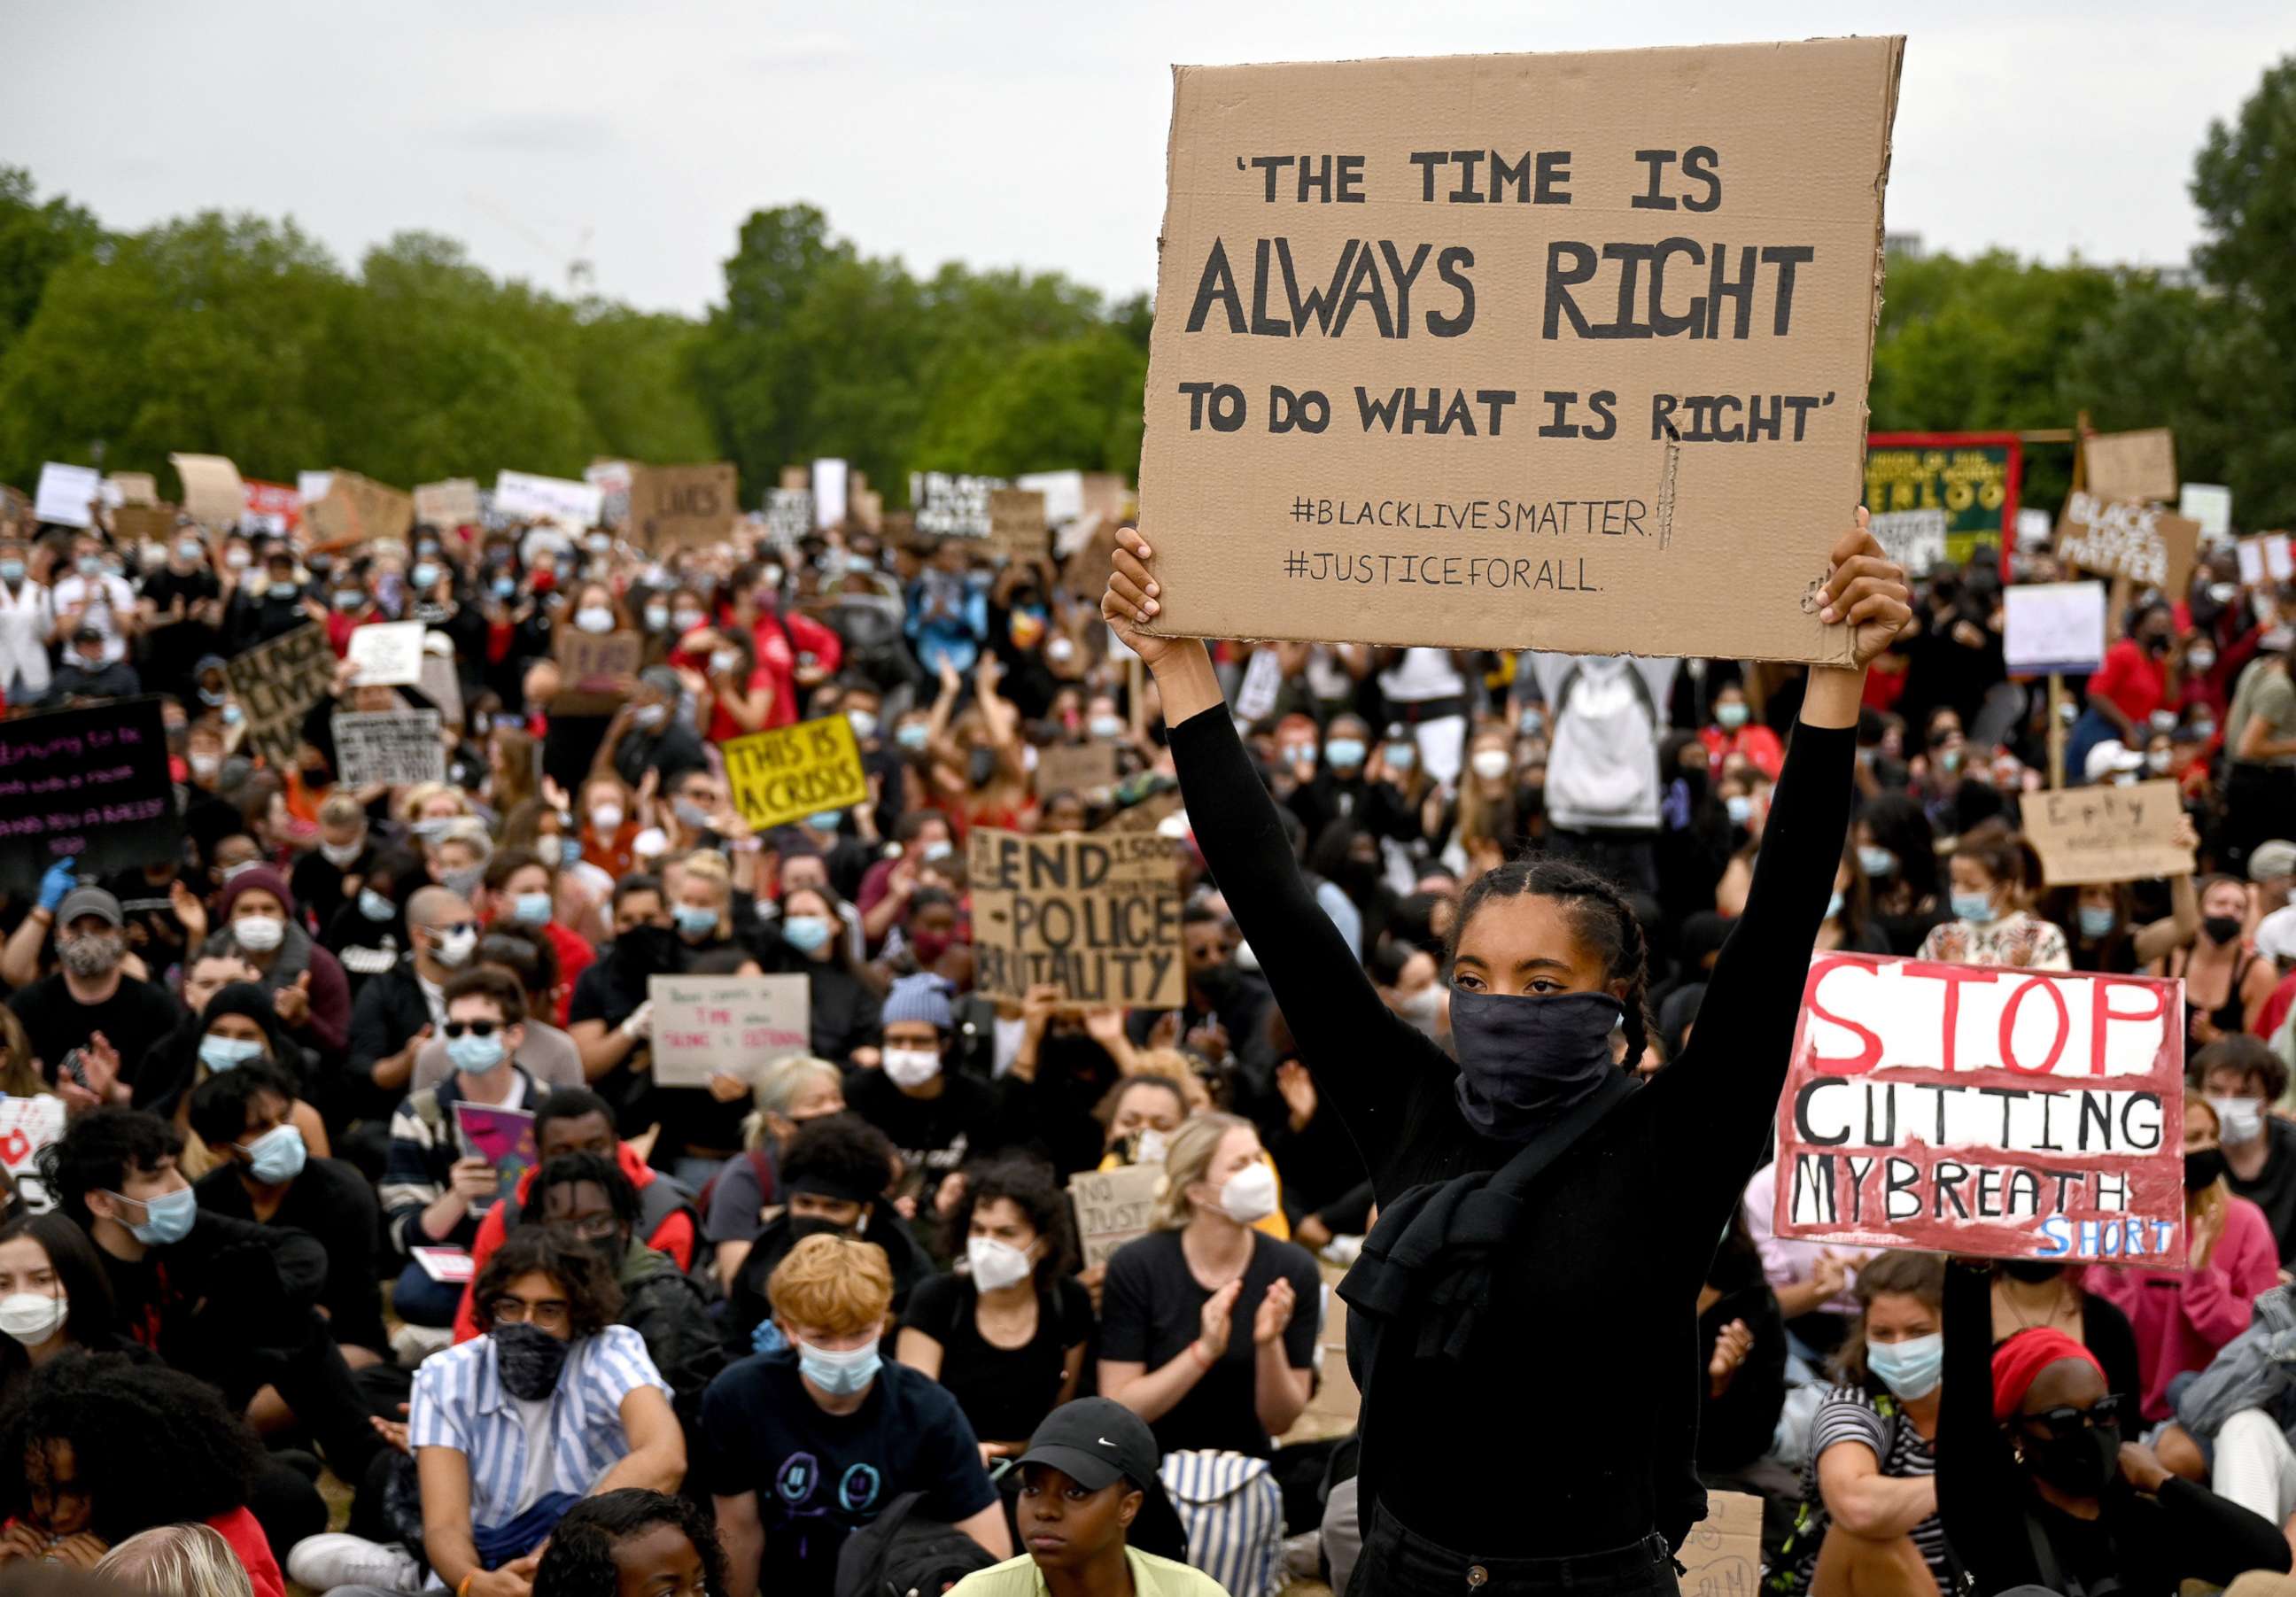 PHOTO: Mandatory Credit: Photo by NEIL HALL/EPA-EFE/REX (10668323n)
Crowds Crowds gather to demonstrate at a Justice for Black Lives protest in London, June 3, 2020.